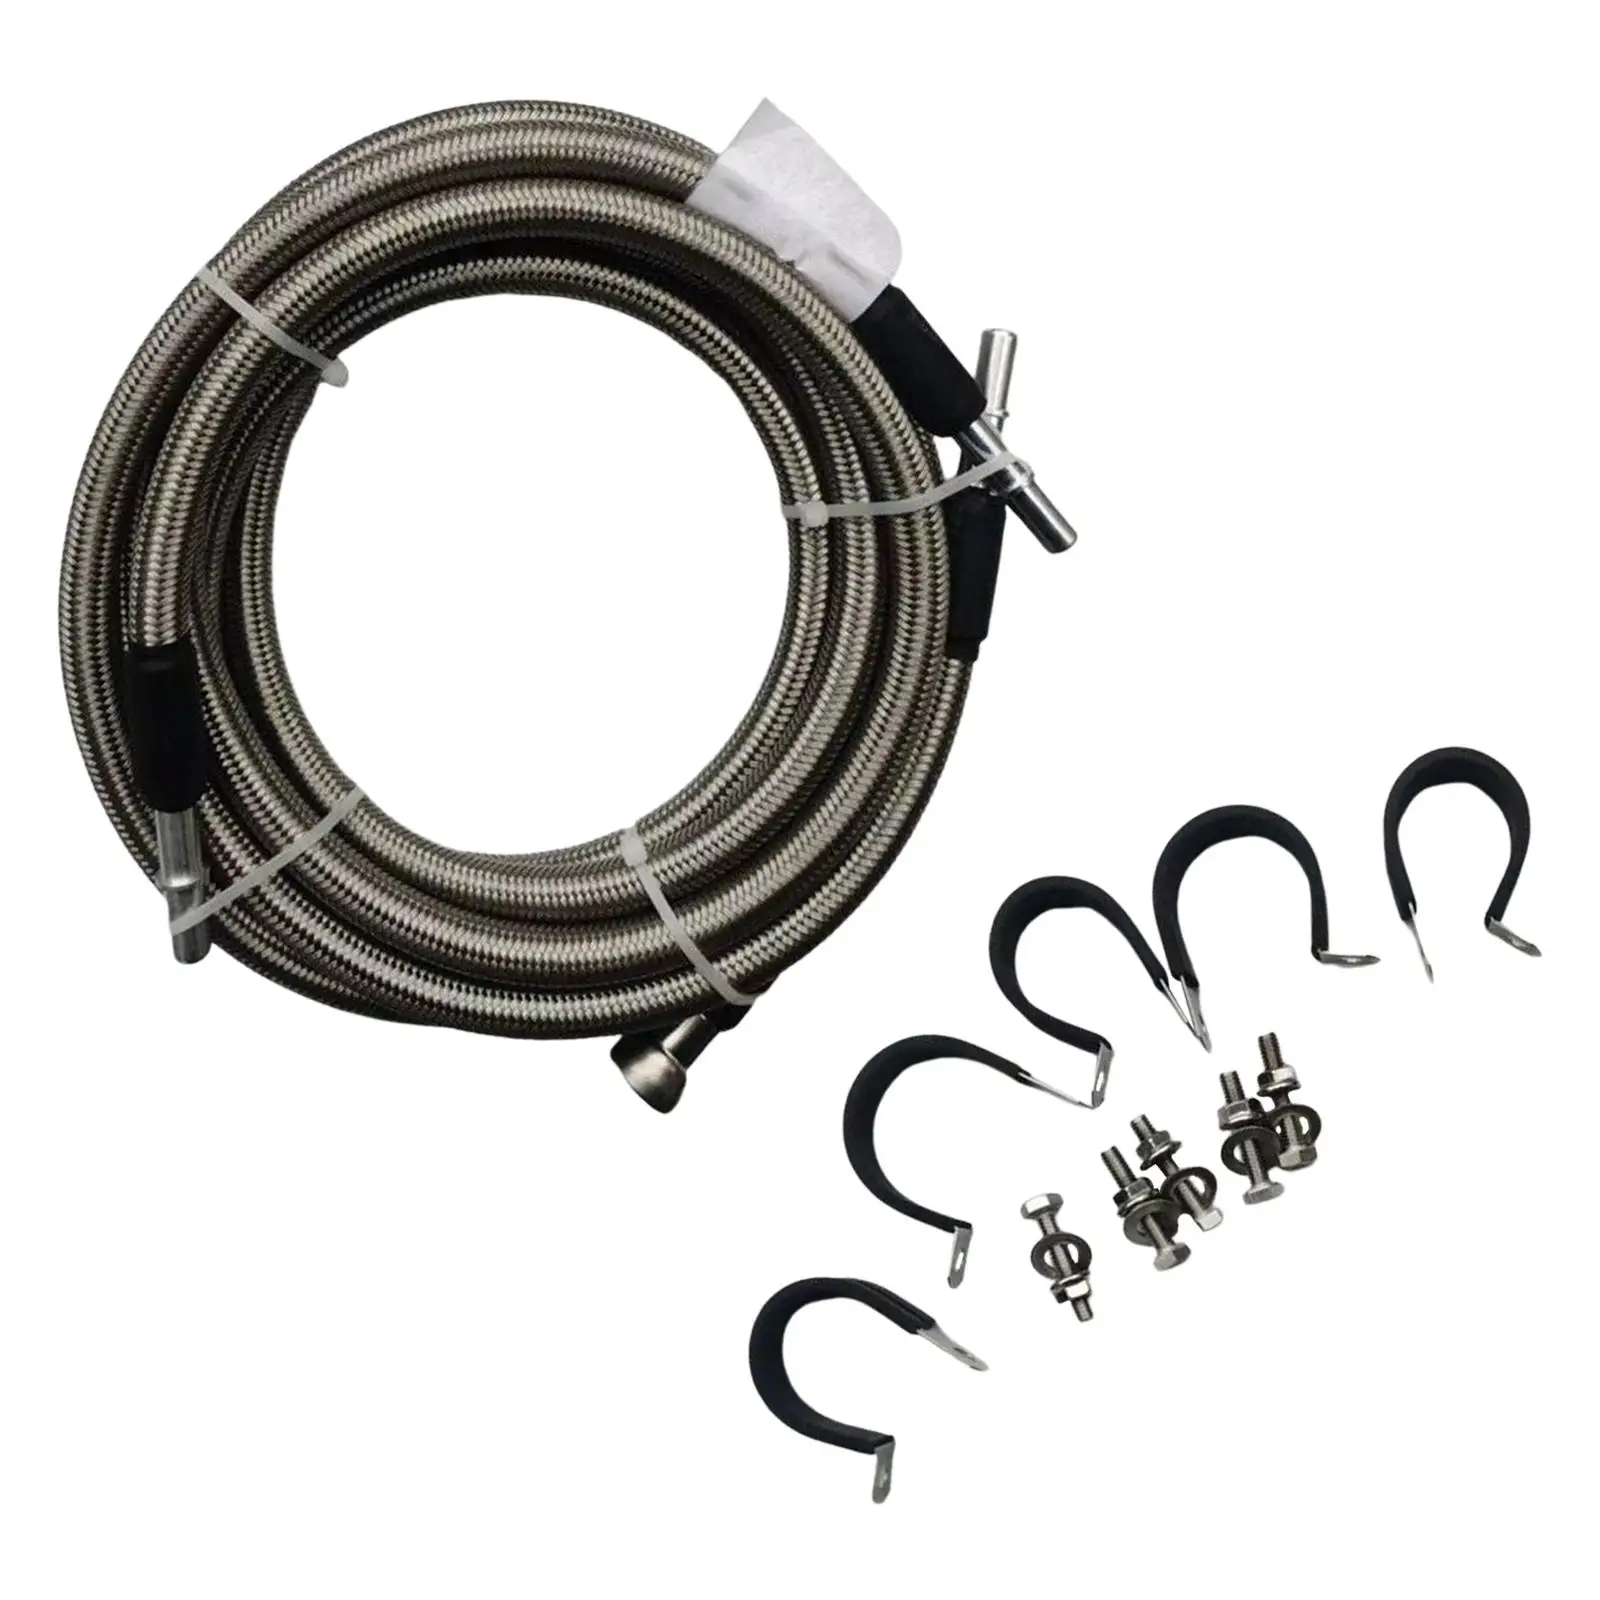 

Braided Fuel Line Kits Automotive Engine Accessories Car Equipment High Performance Fuel Pipe Fuel Hose for Tractors Trucks